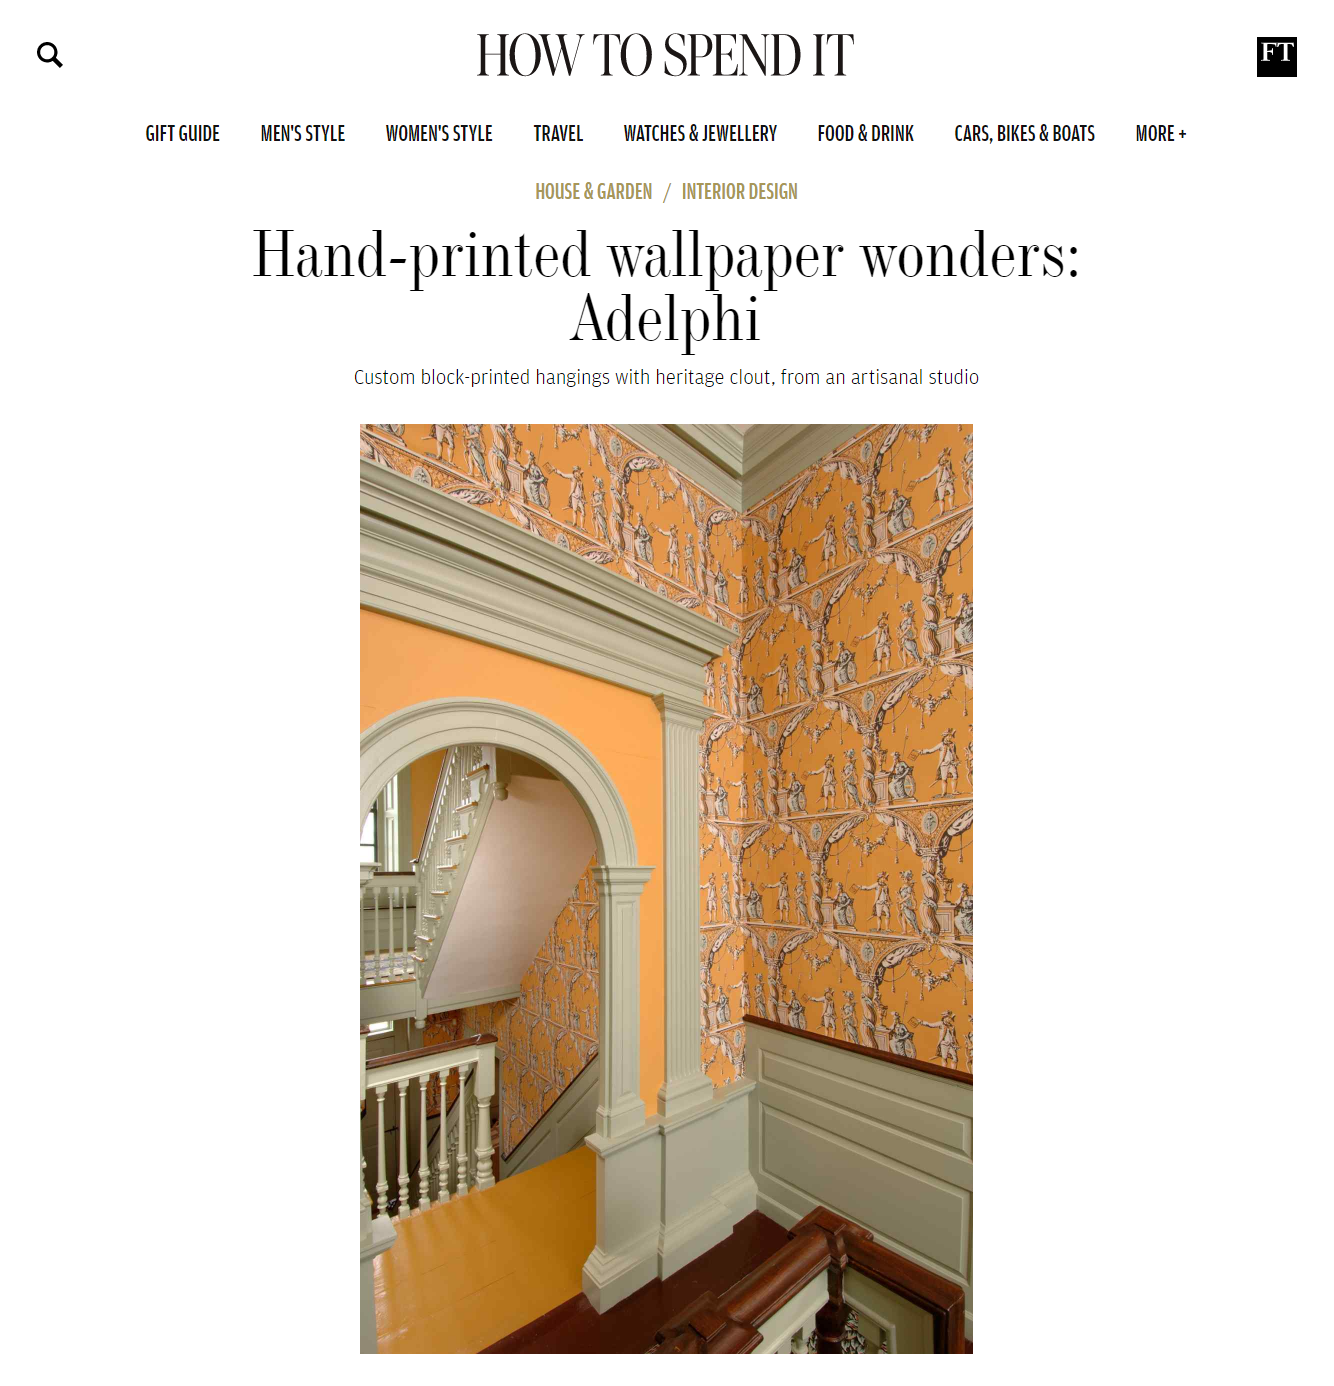 Adelphi Paper Hangings  Restoration Wallcoverings  New York  US  The  Interiors Index  The World Of Interiors